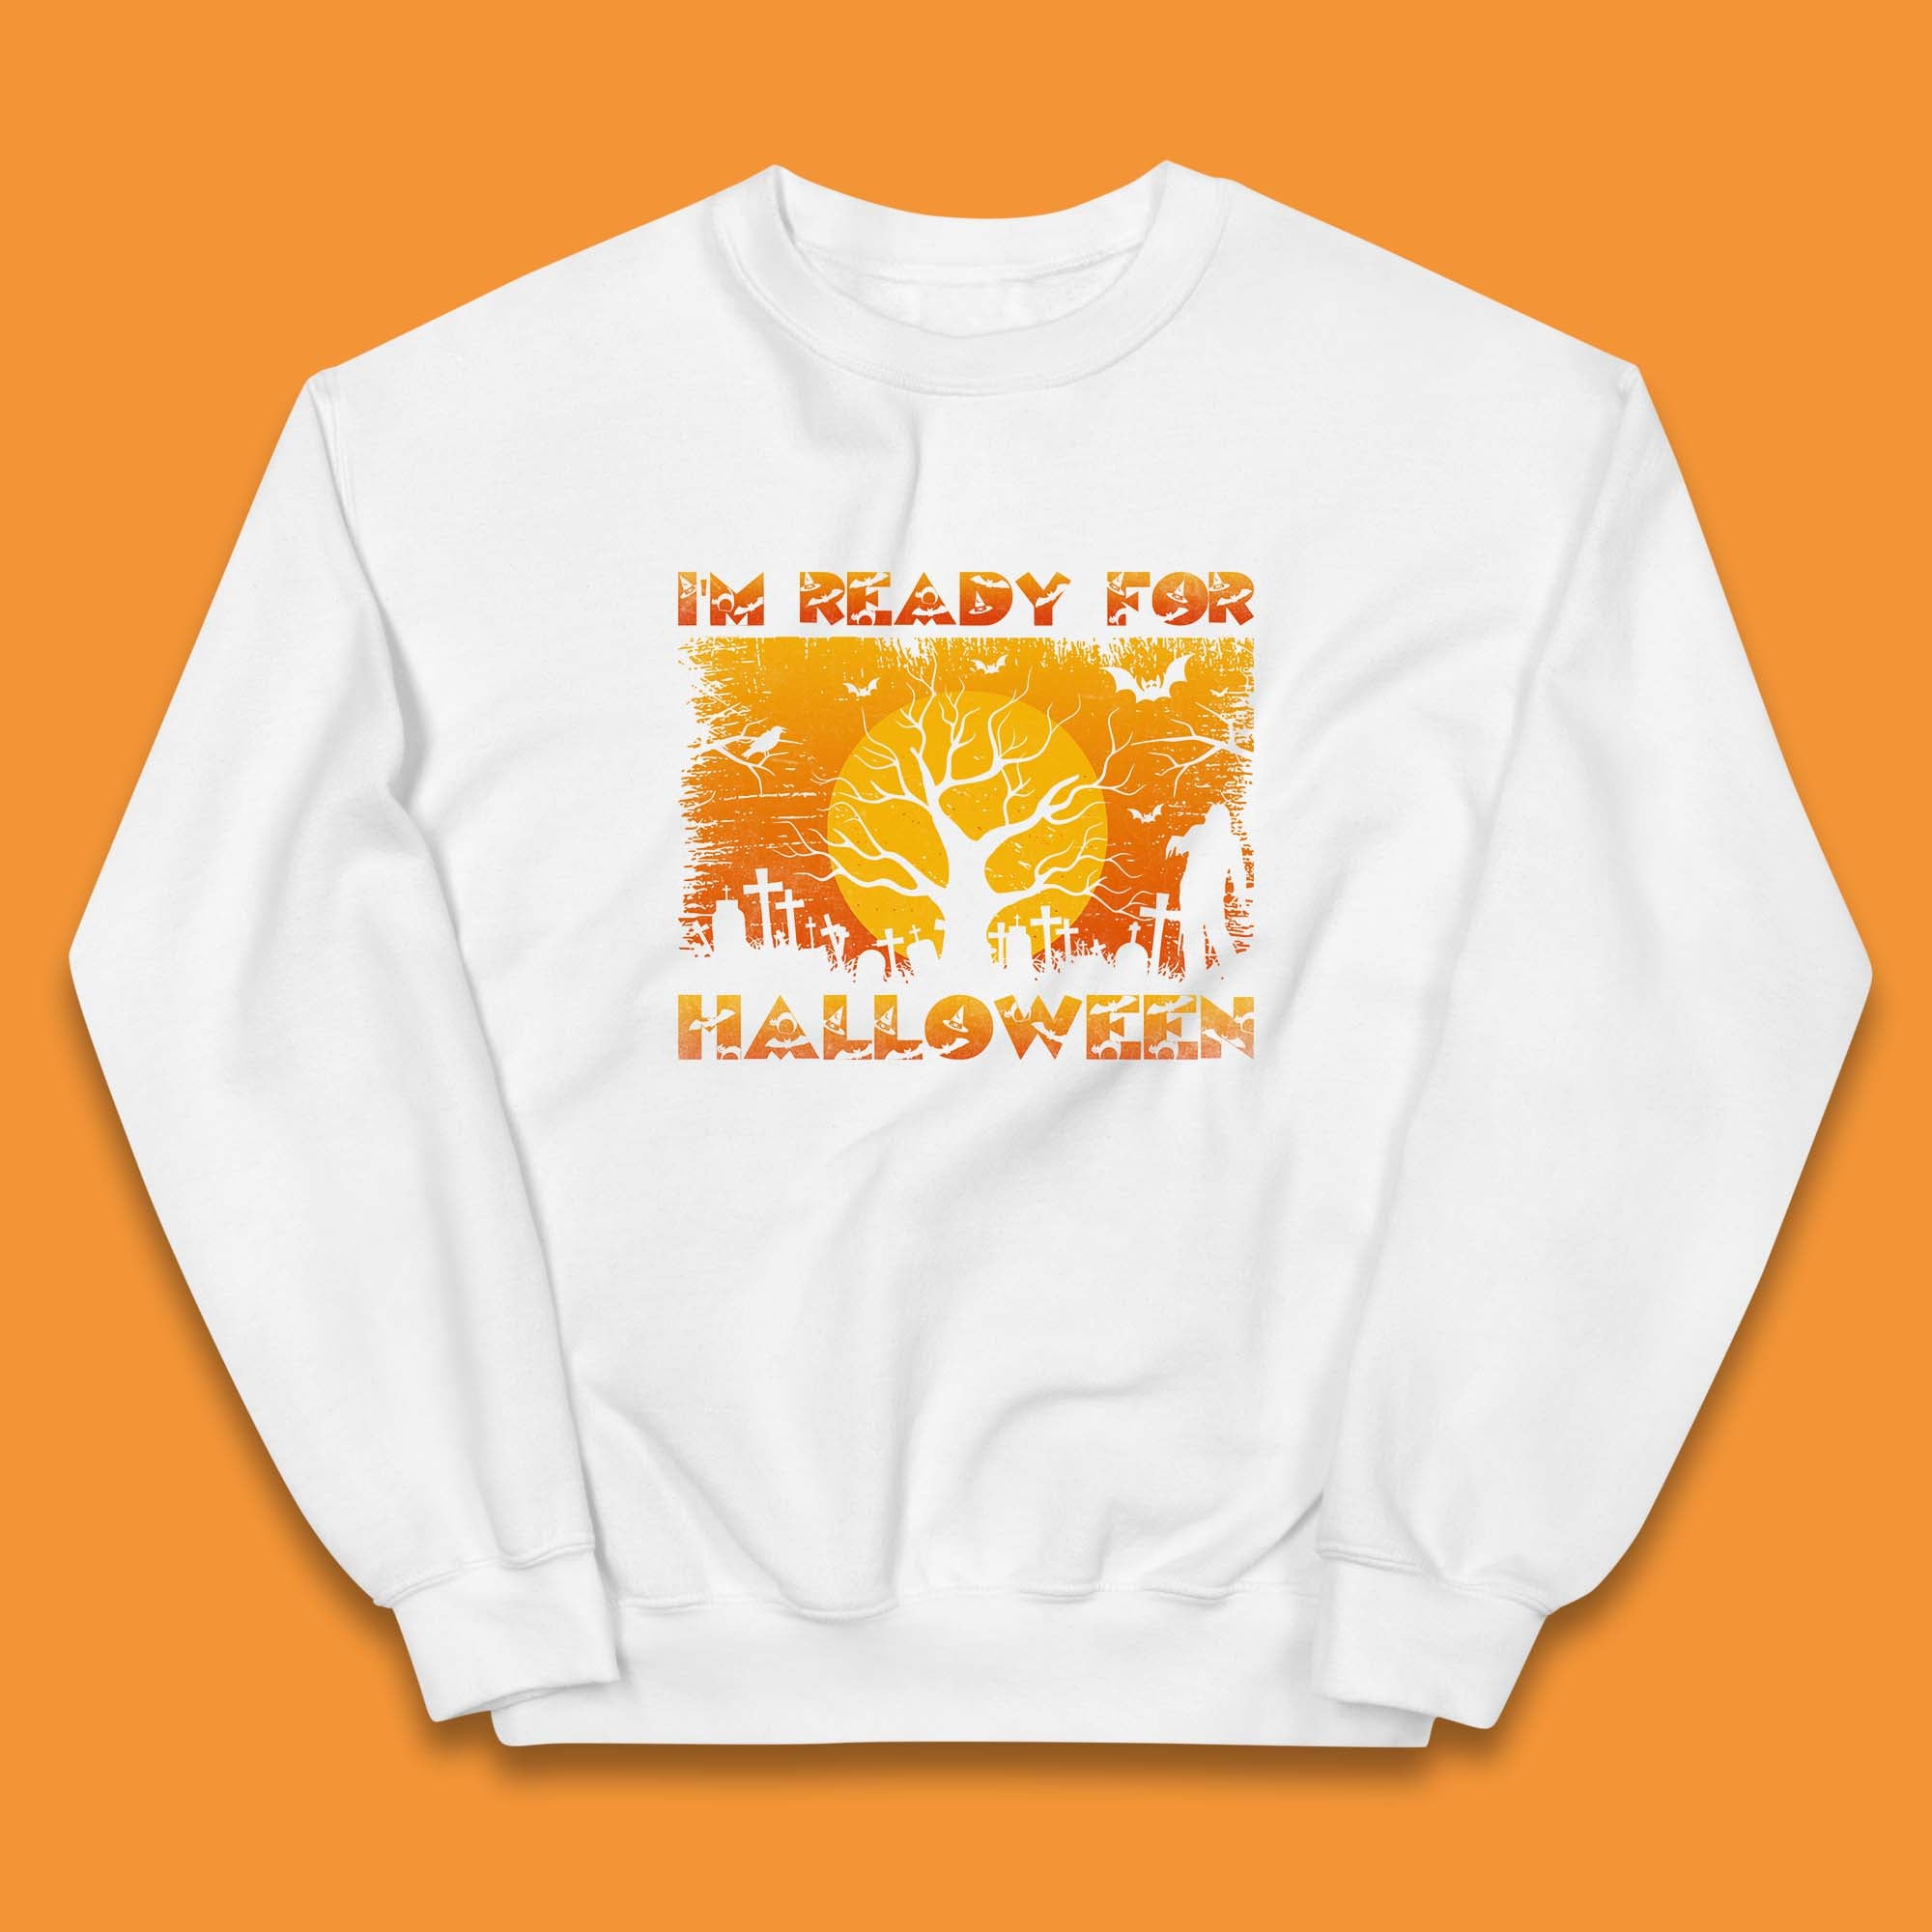 I'm Ready For Halloween Horror Scary Halloween Zombie Graveyards With Dead Tree Kids Jumper